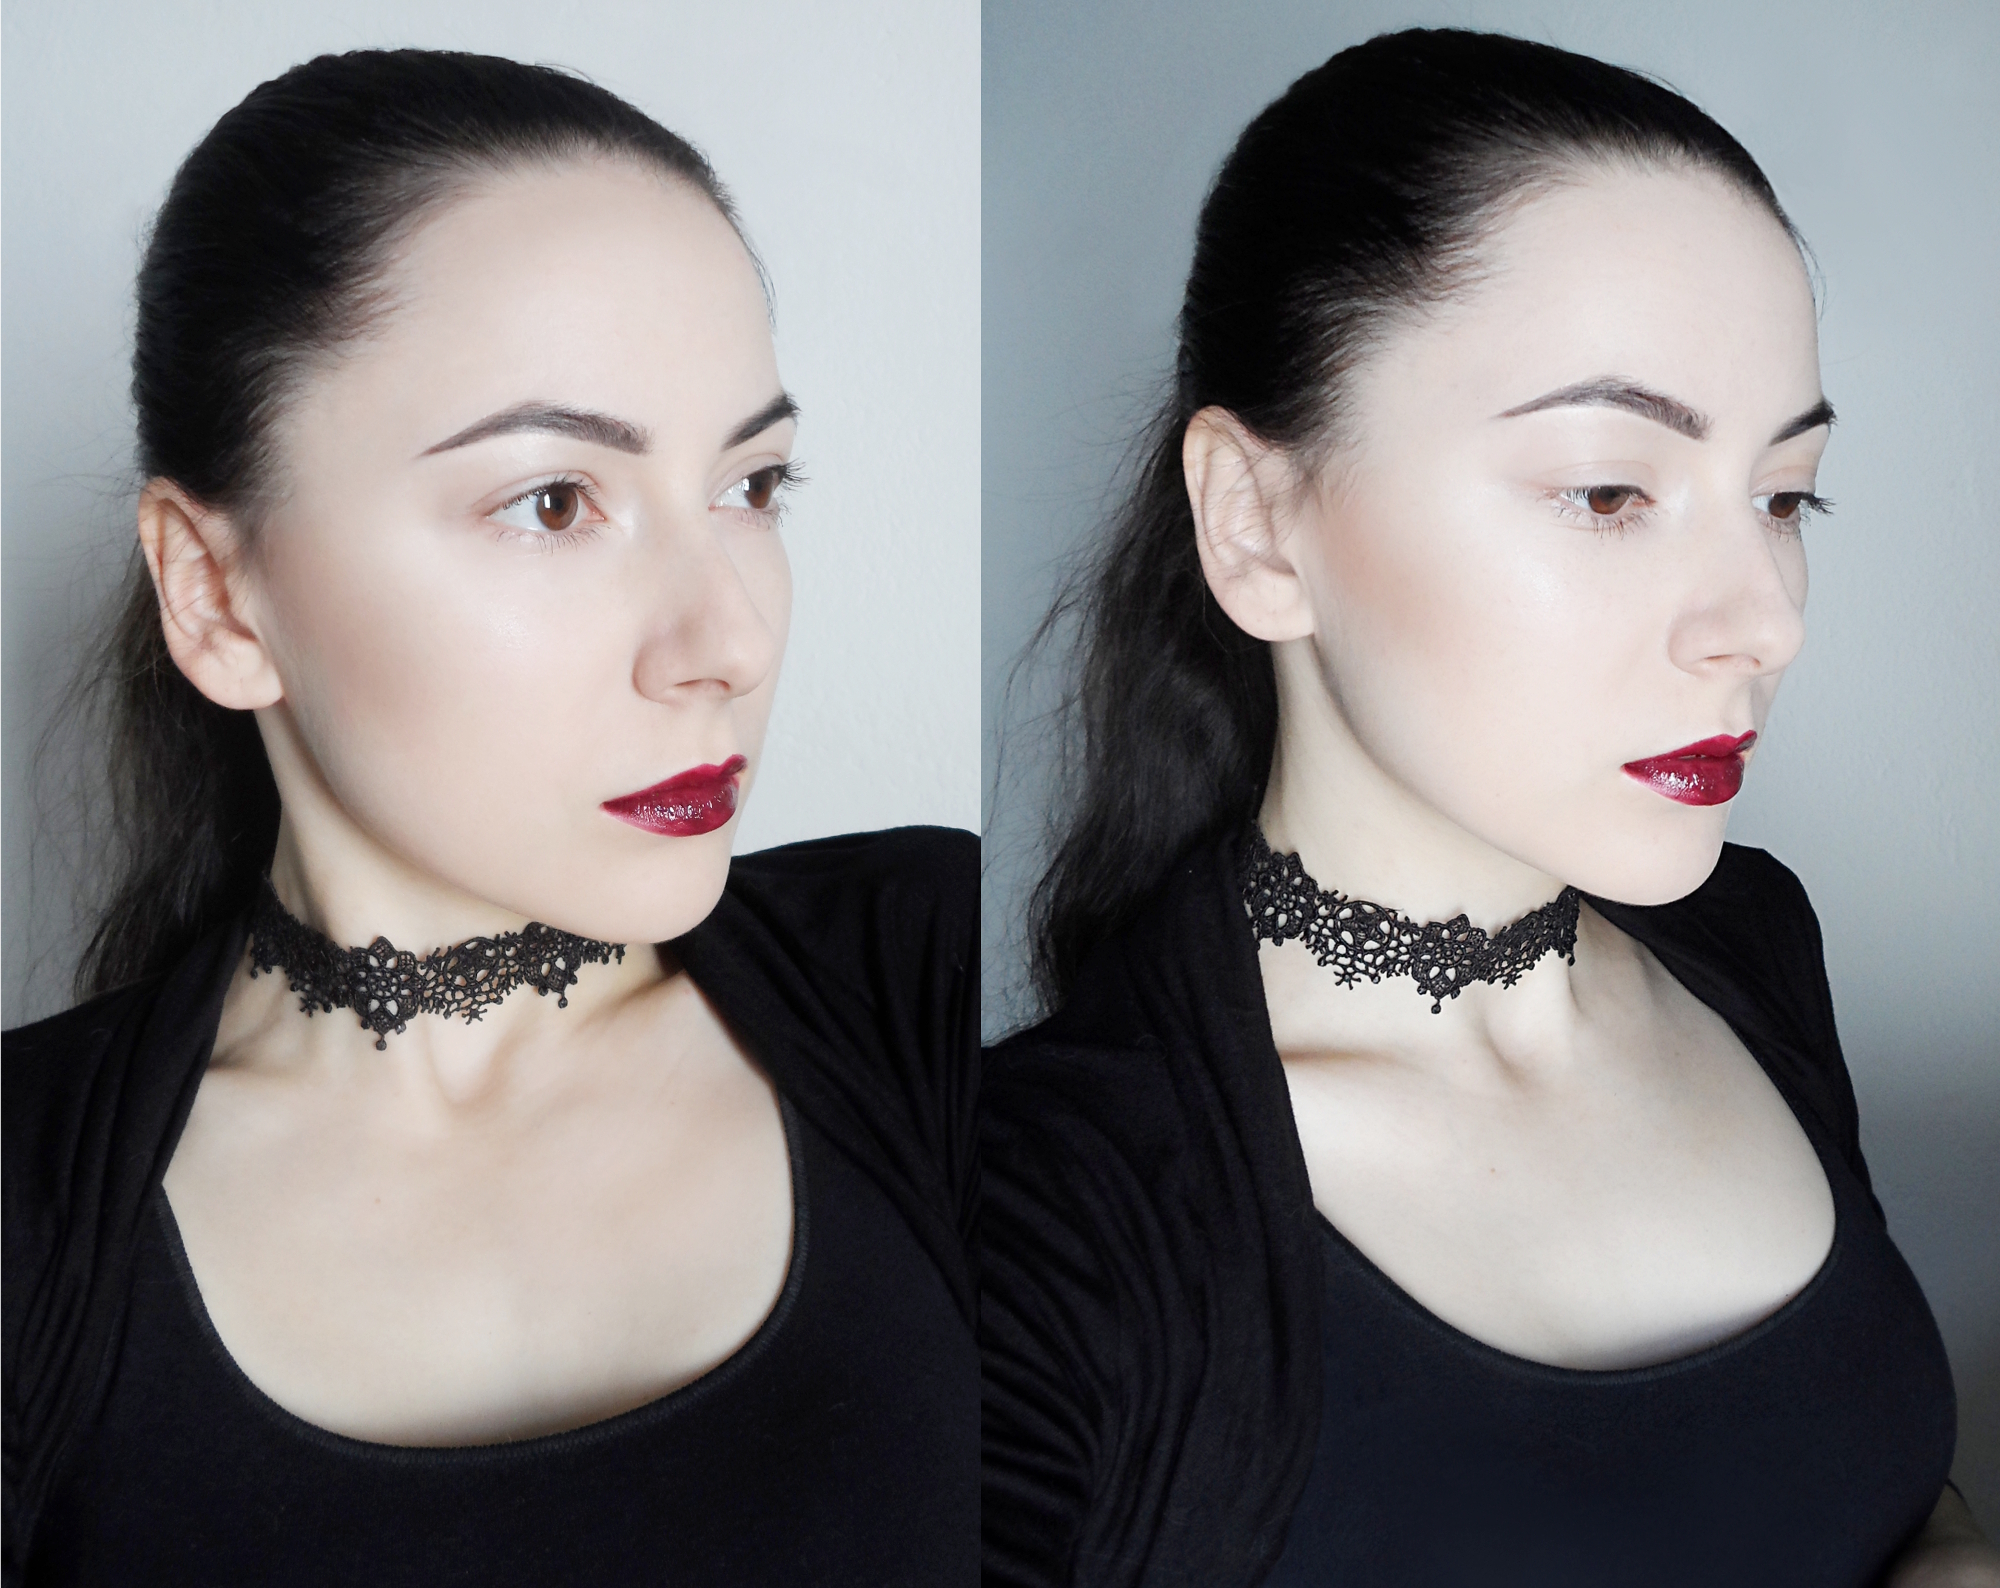 Liz Breygel's selfie with a simple gothic makeup look and victorian lace chocker on her neck